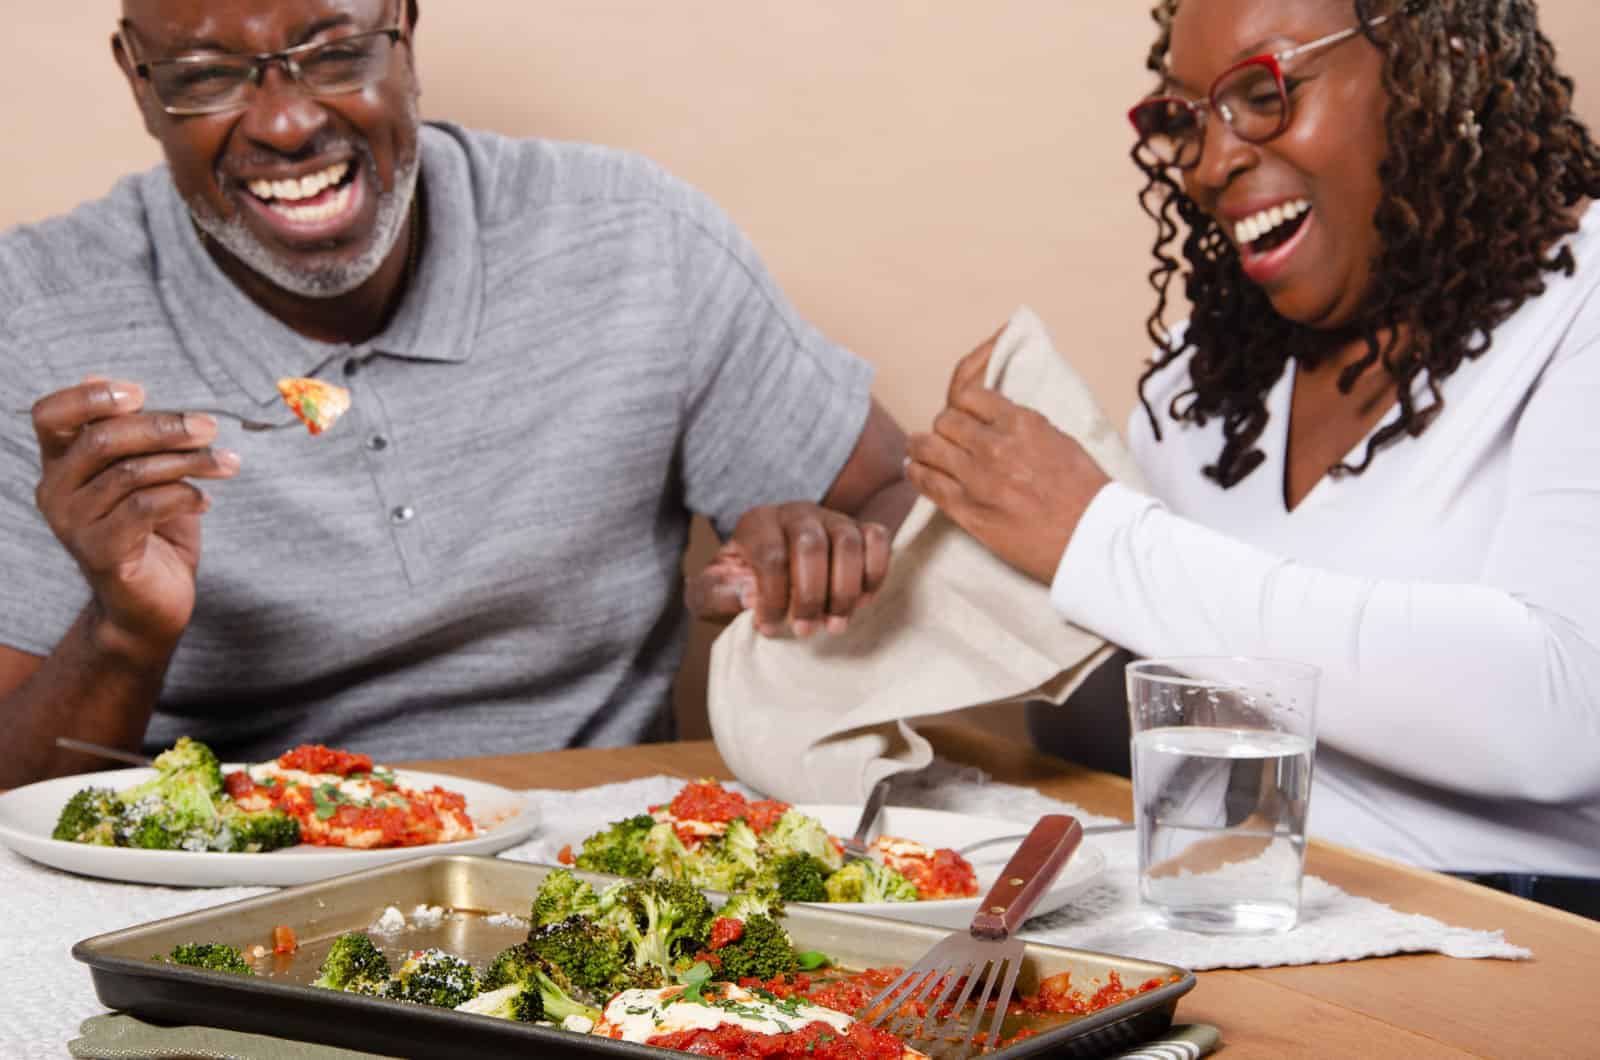 A man and woman sitting at a dinner table laughing while eating chicken parmesan.